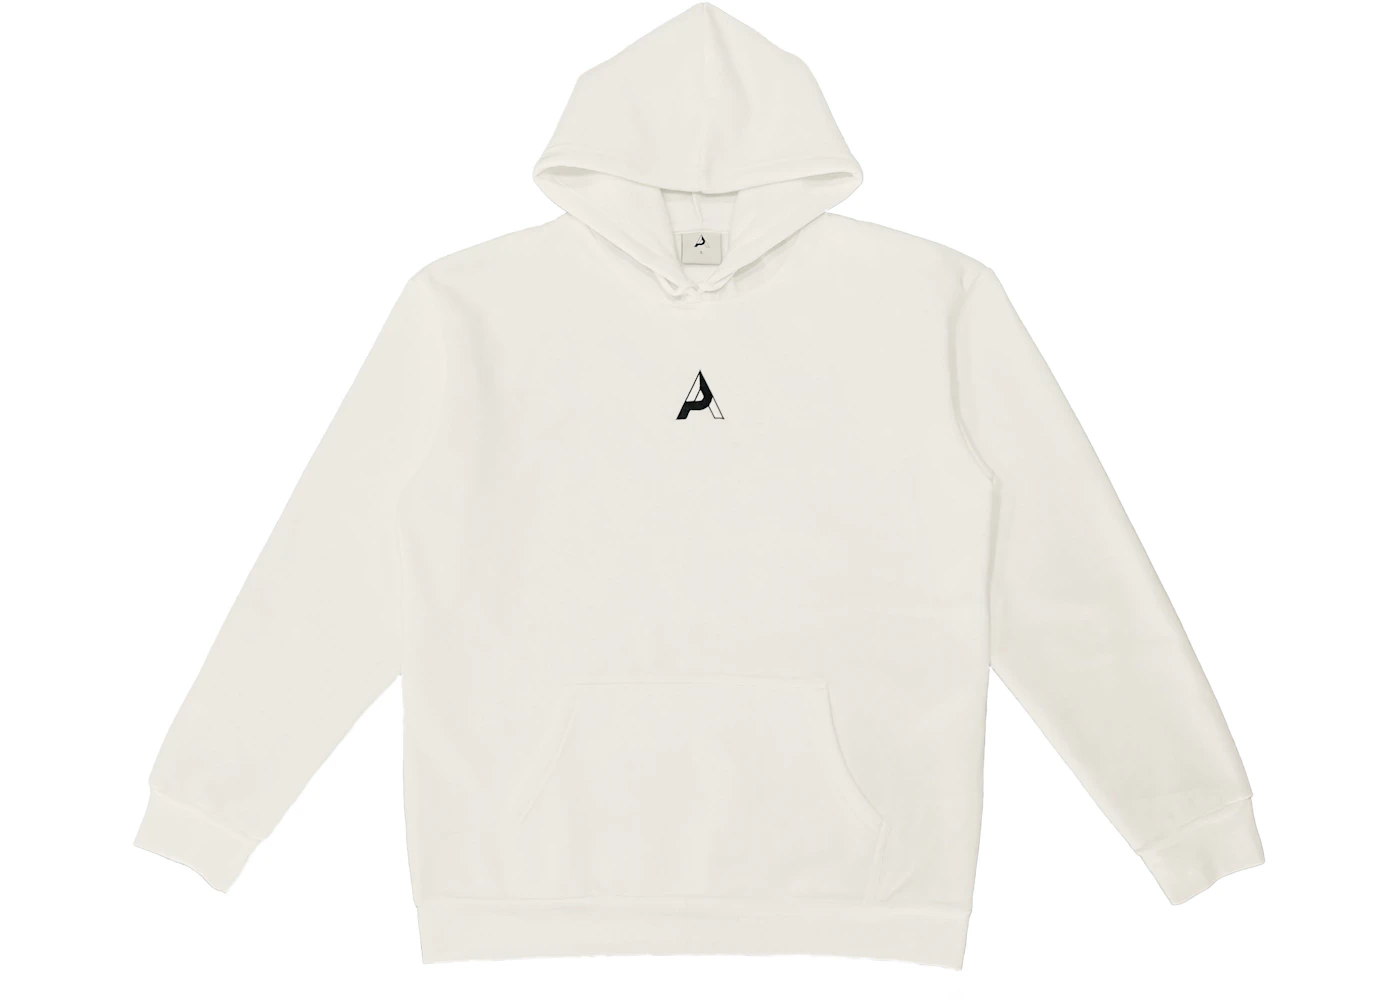 Paradise Apparel Embroidered Logo Hoodie White Men's - SS21 - US